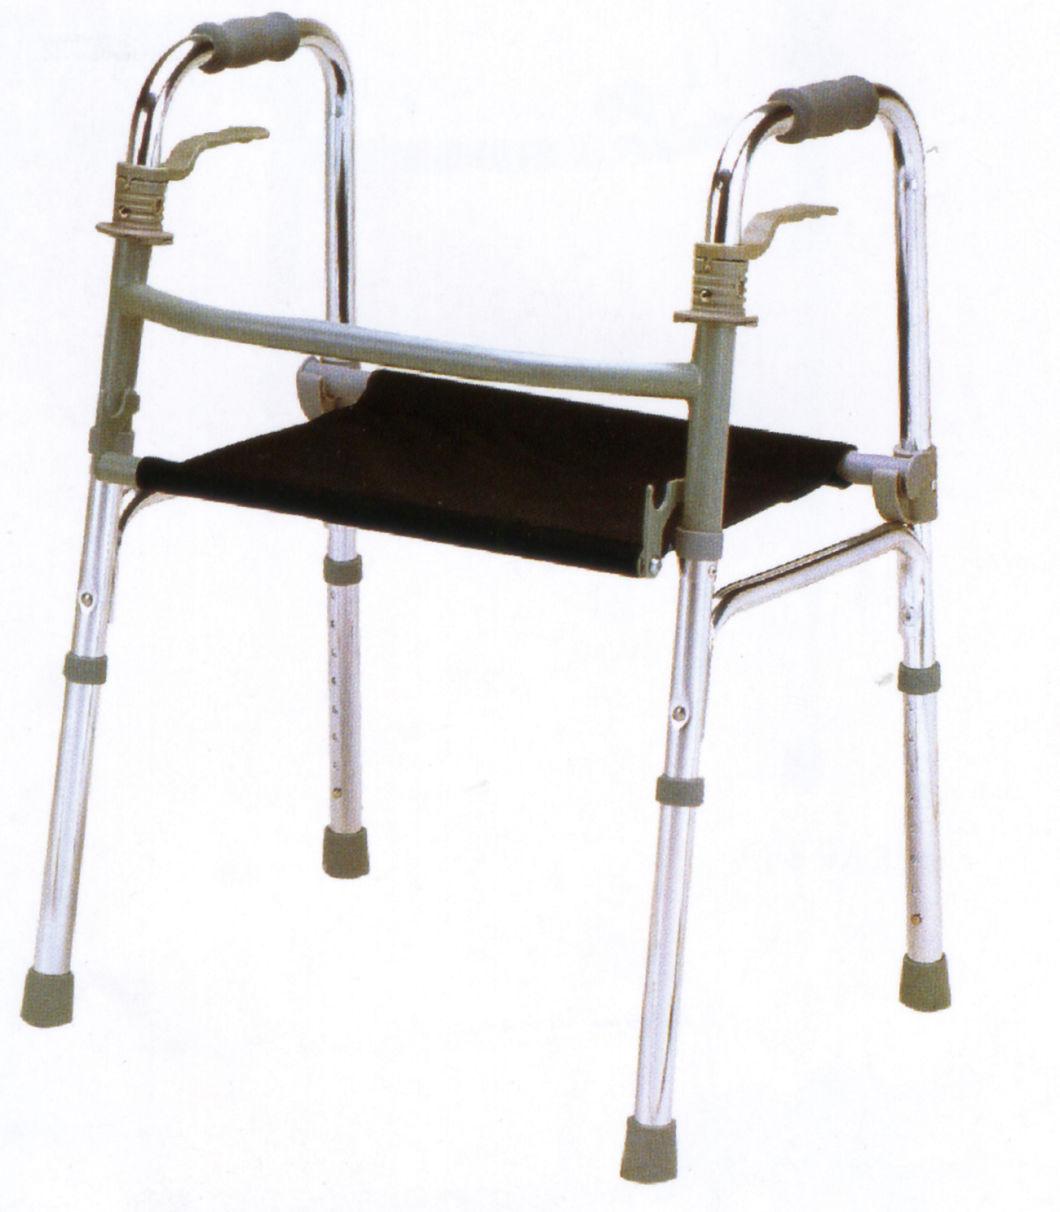 Healthcare Product Walker Frame Adjustable Height with Seat